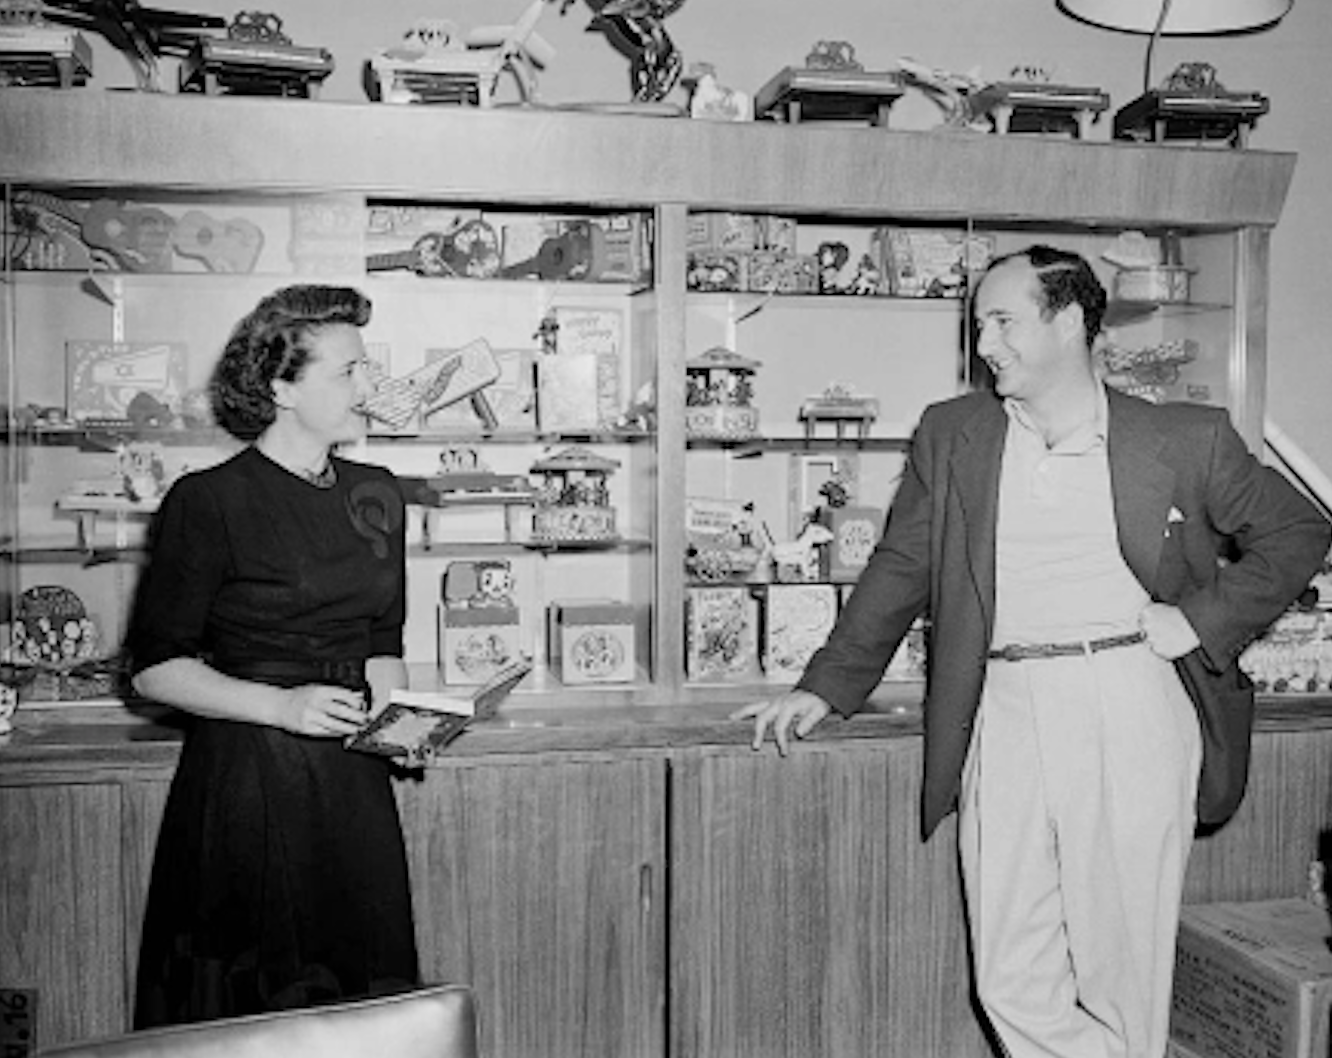 The founders of Mattel, Ruth and Elliot Handler. Image from Mattel.